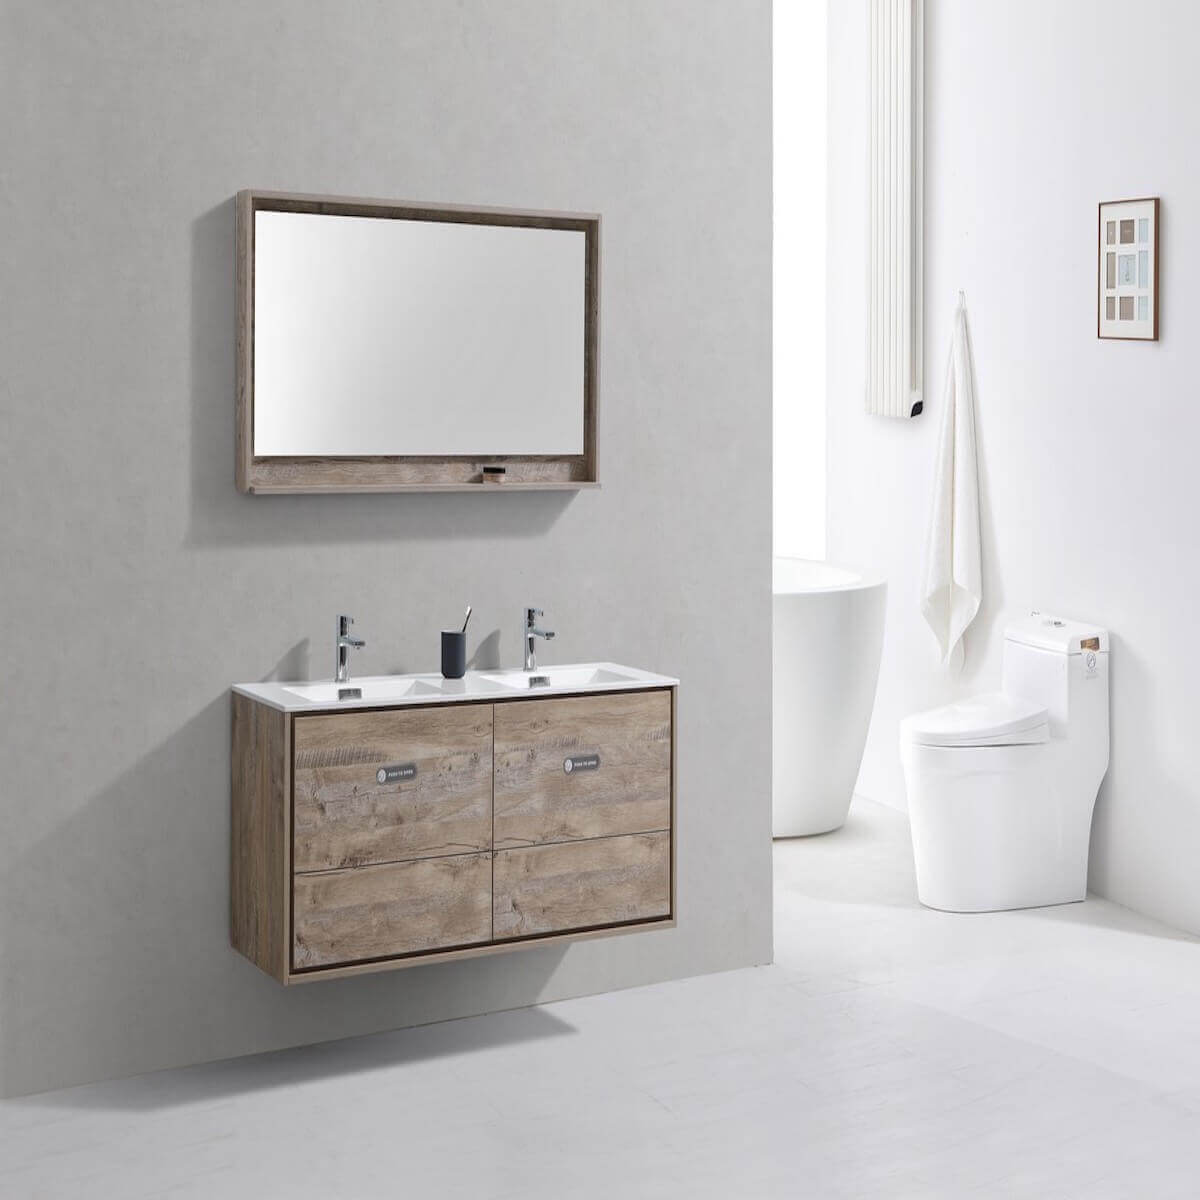 KubeBath DeLusso 60" Nature Wood Wall Mount Double Vanity DL60D-NW in Bathroom #finish_nature wood